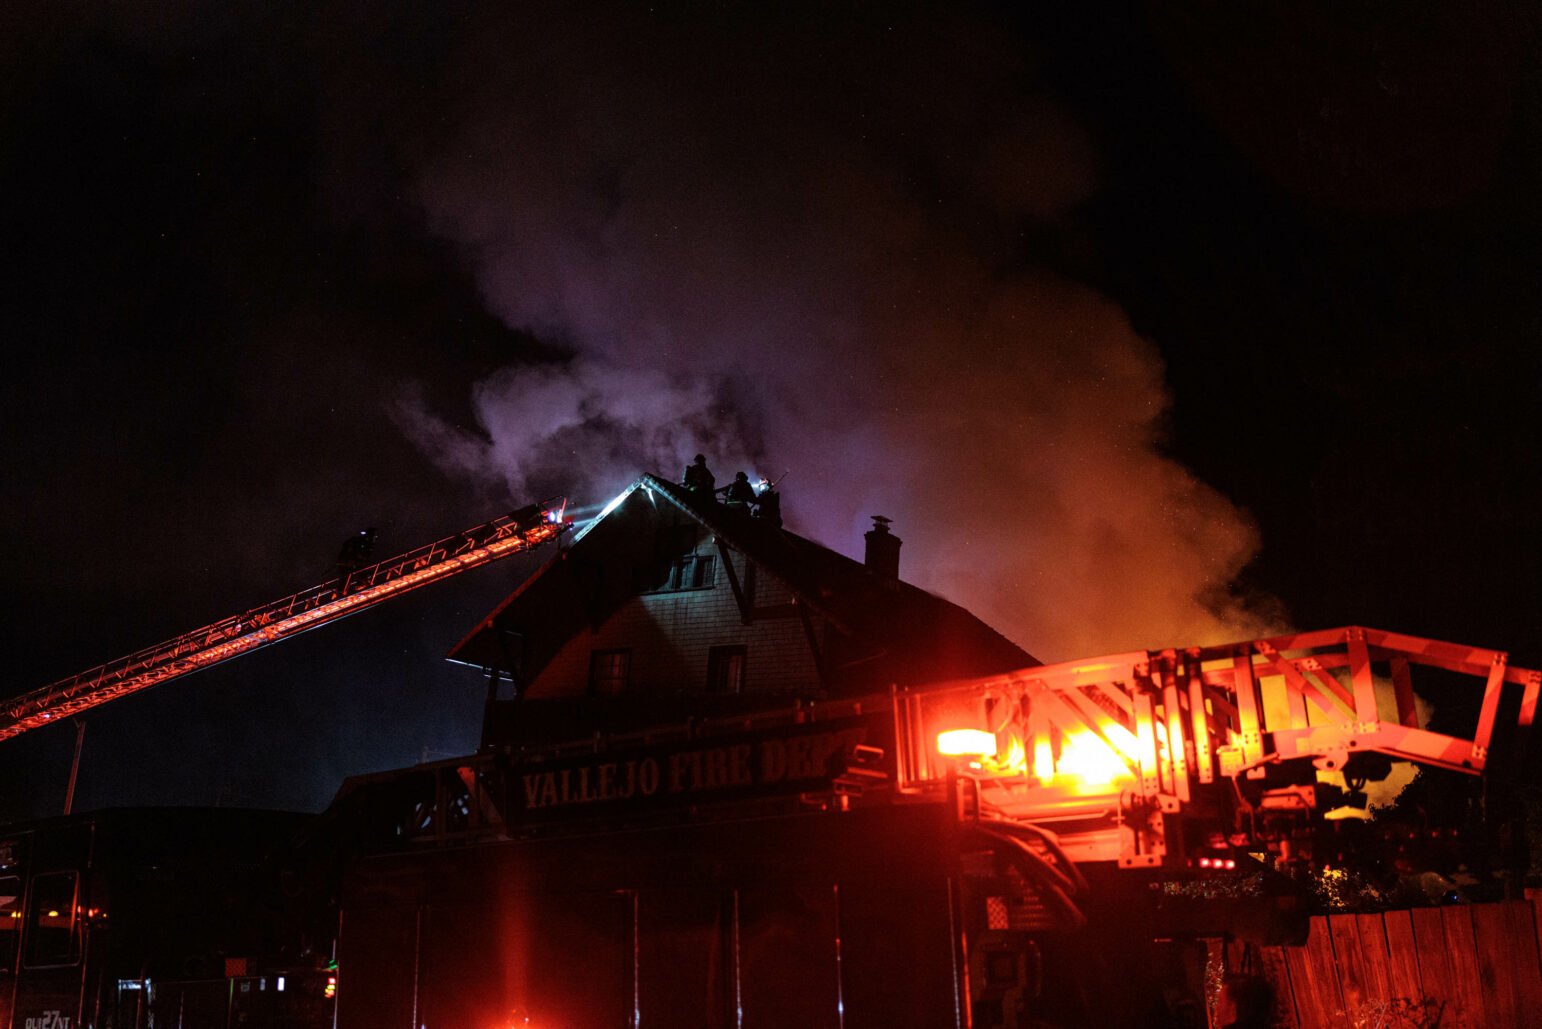 A dramatic nighttime scene showing firefighters battling a blaze at a large multi-story house. The roof of the house smokes under a dark sky, with firefighters visible on the roof via a ladder truck, working to control the fire, highlighting the intensity and danger of their work.